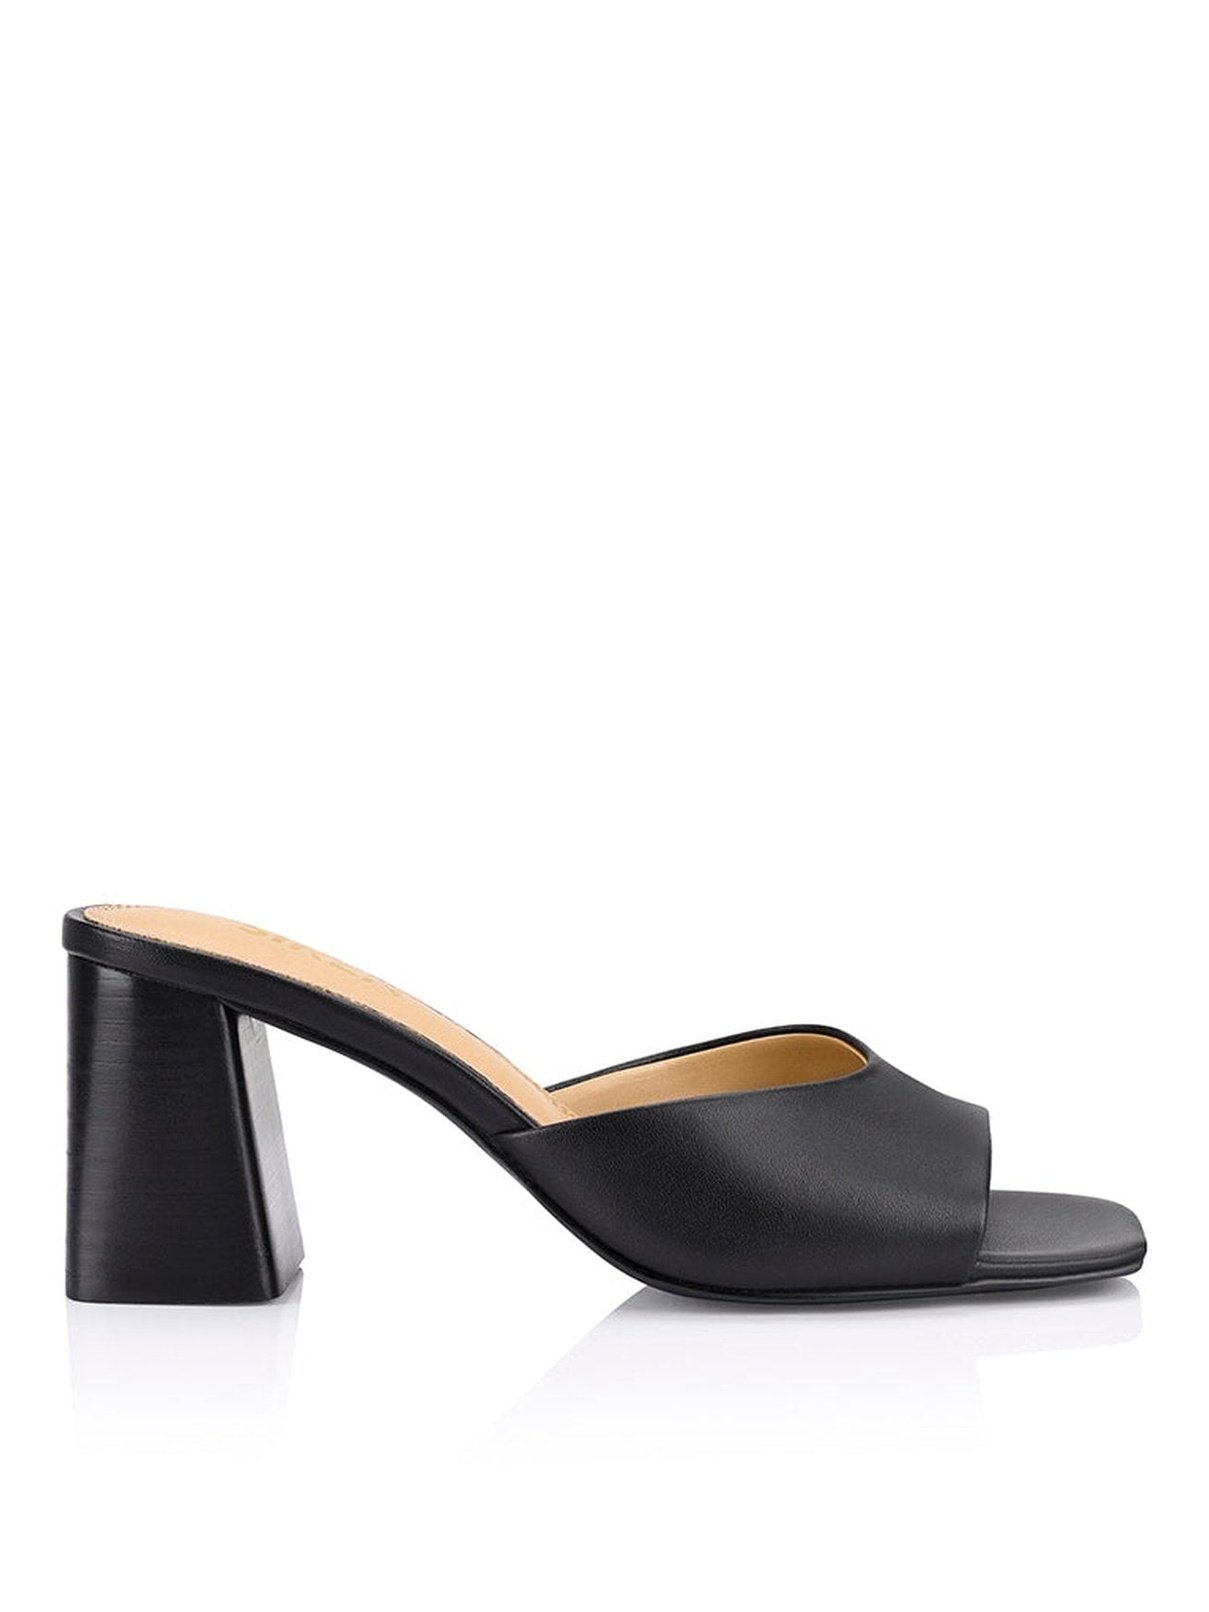 Stop Heeled Mules - Black Leather